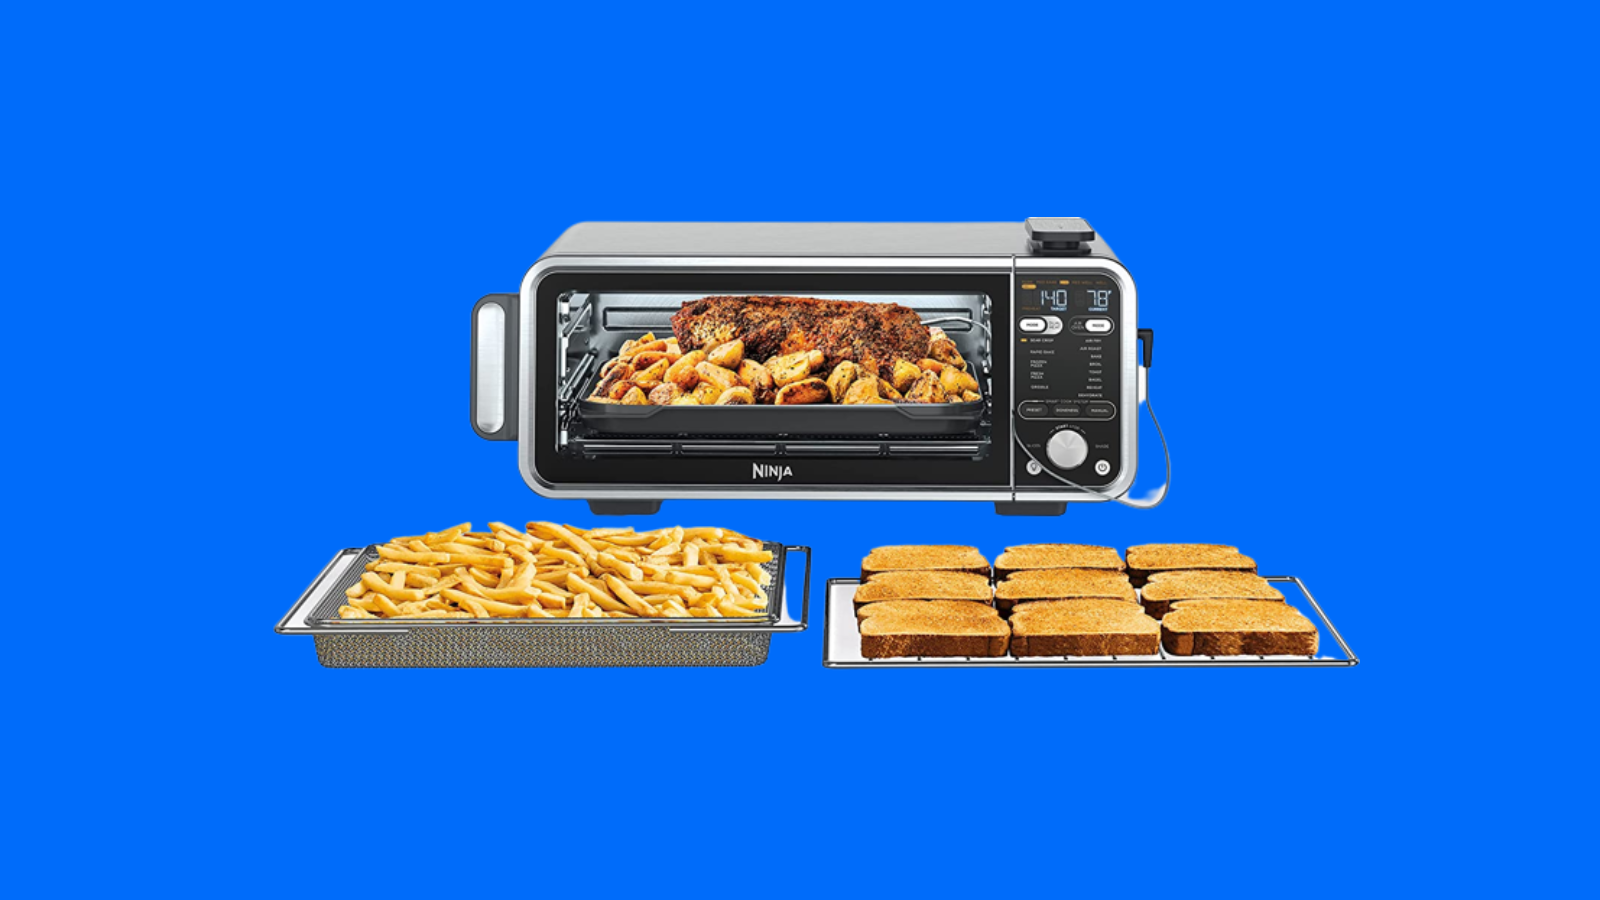 ALDI Clearance - Up to 70% Off Air Fryers & More - The Freebie Guy®